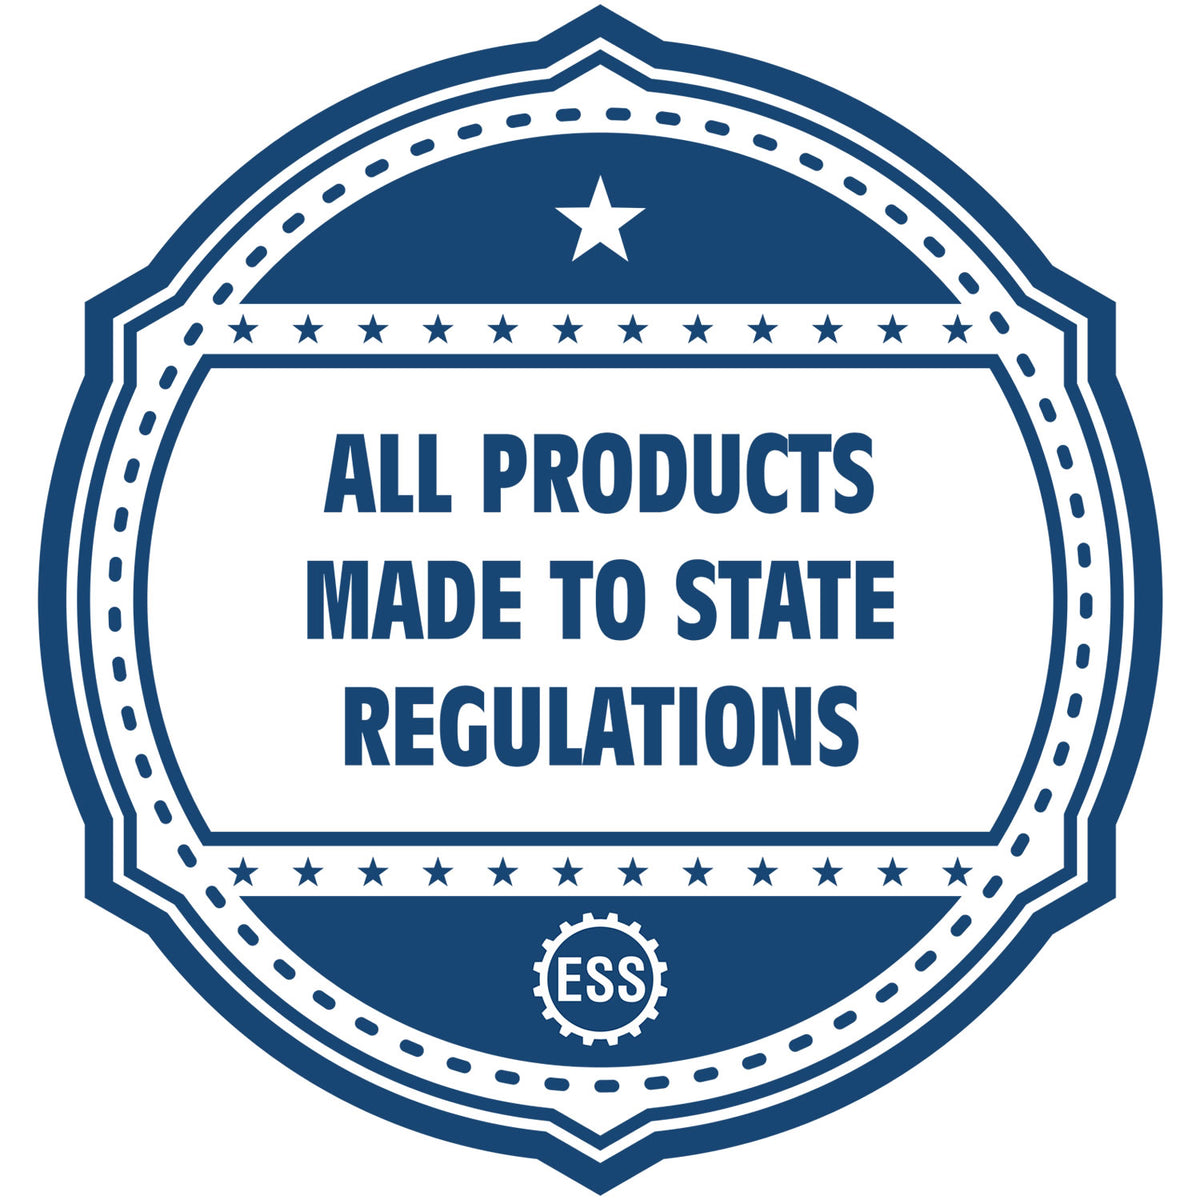 An icon or badge element for the Slim Pre-Inked Montana Professional Engineer Seal Stamp showing that this product is made in compliance with state regulations.